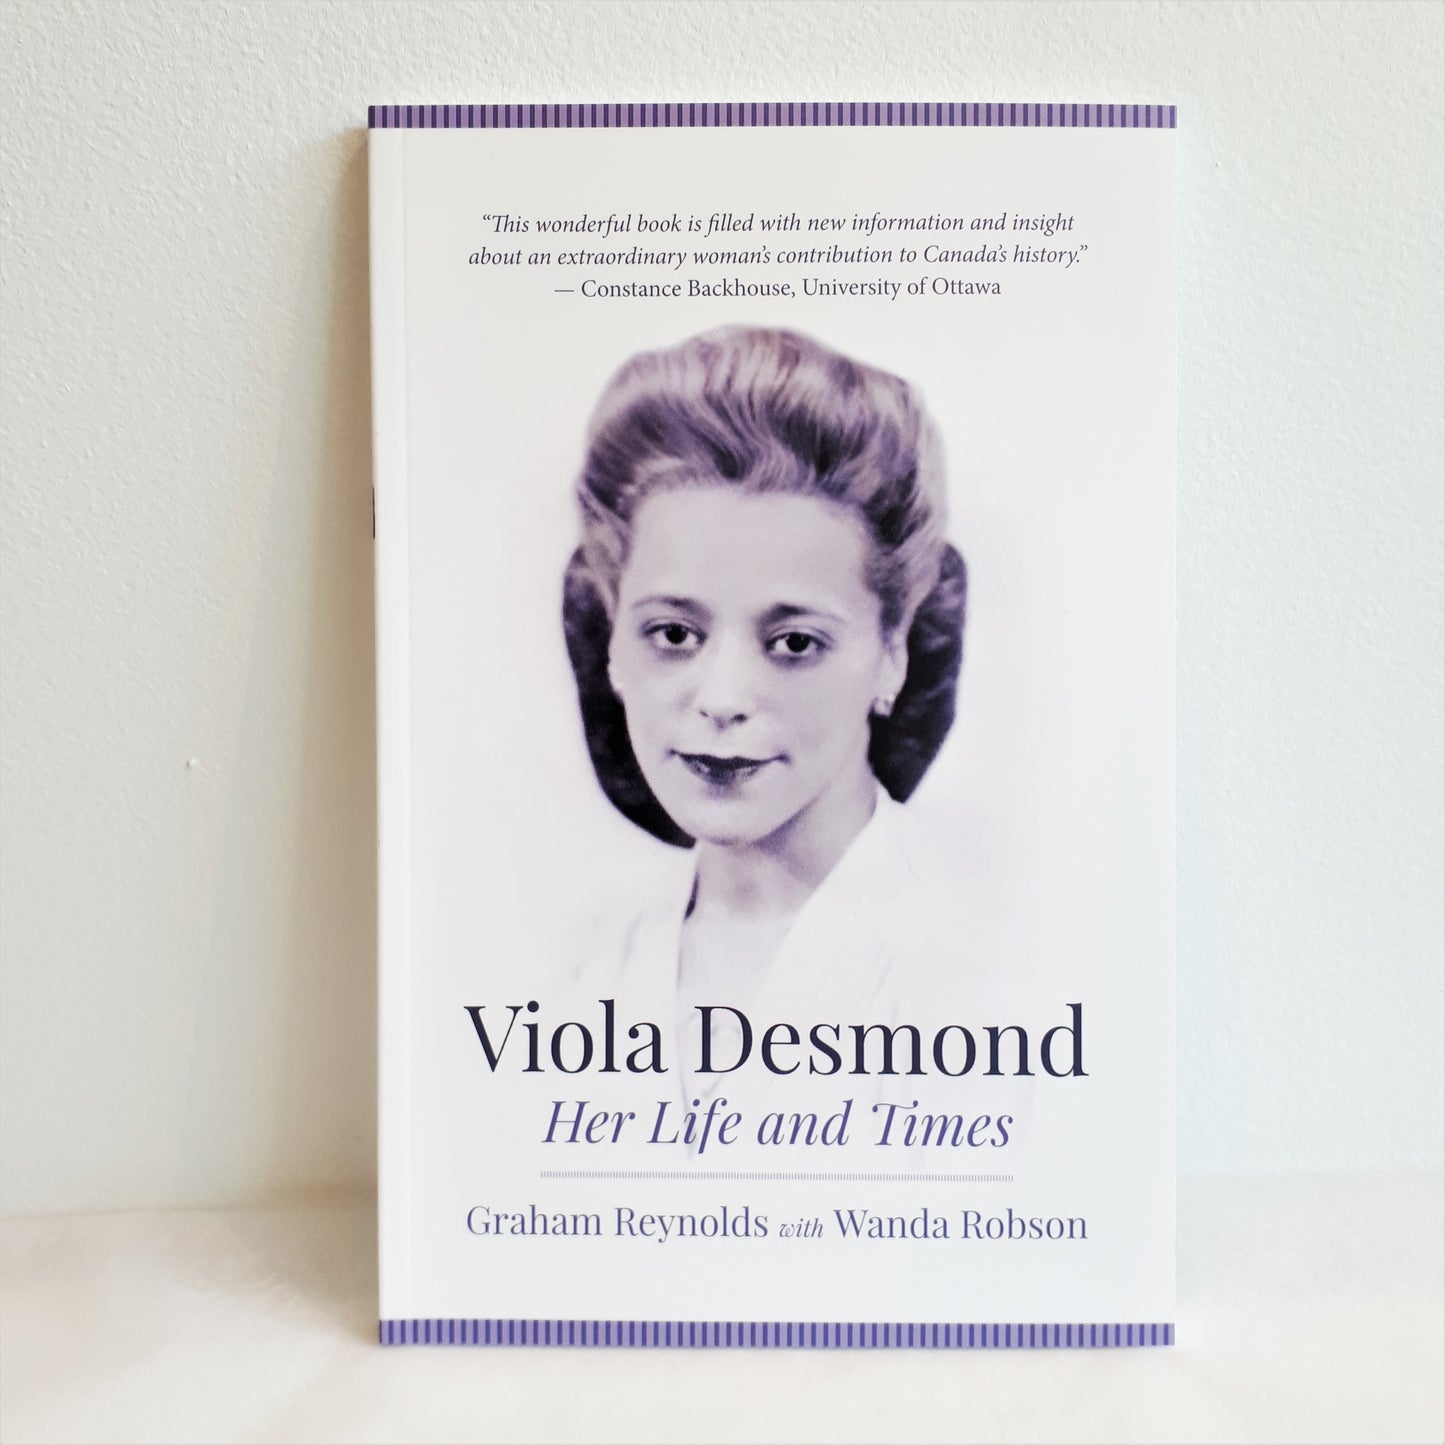 Viola Desmond, Her Life and Times by Graham Reynolds with Wanda Robson